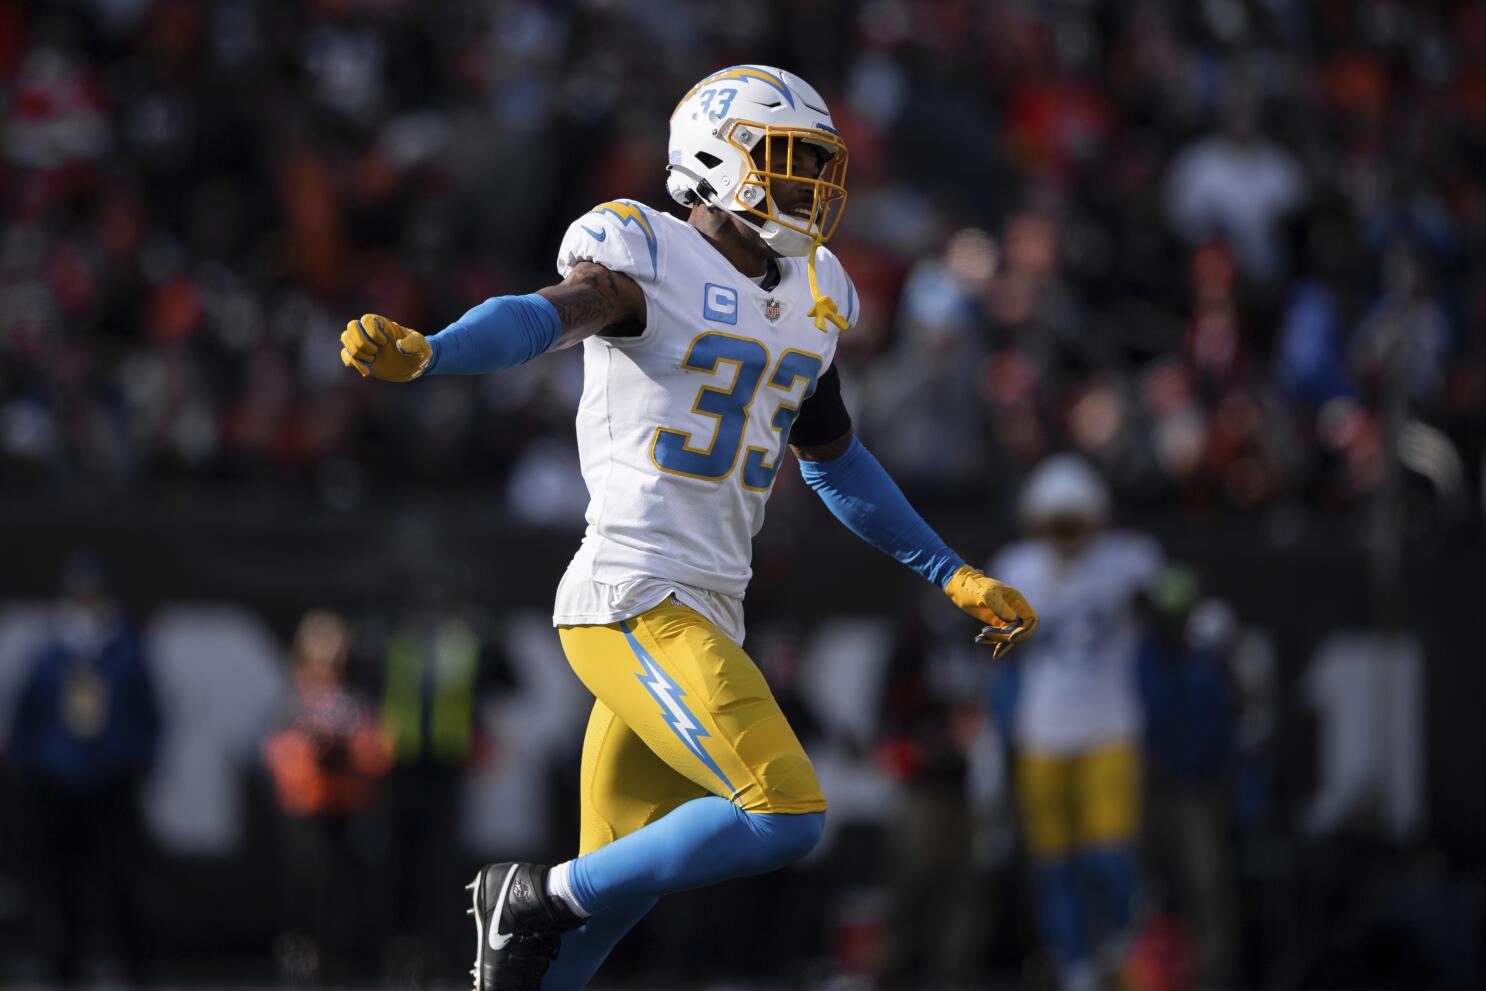 Chargers safety Nasir Adderley, just 25, announces he's done with football